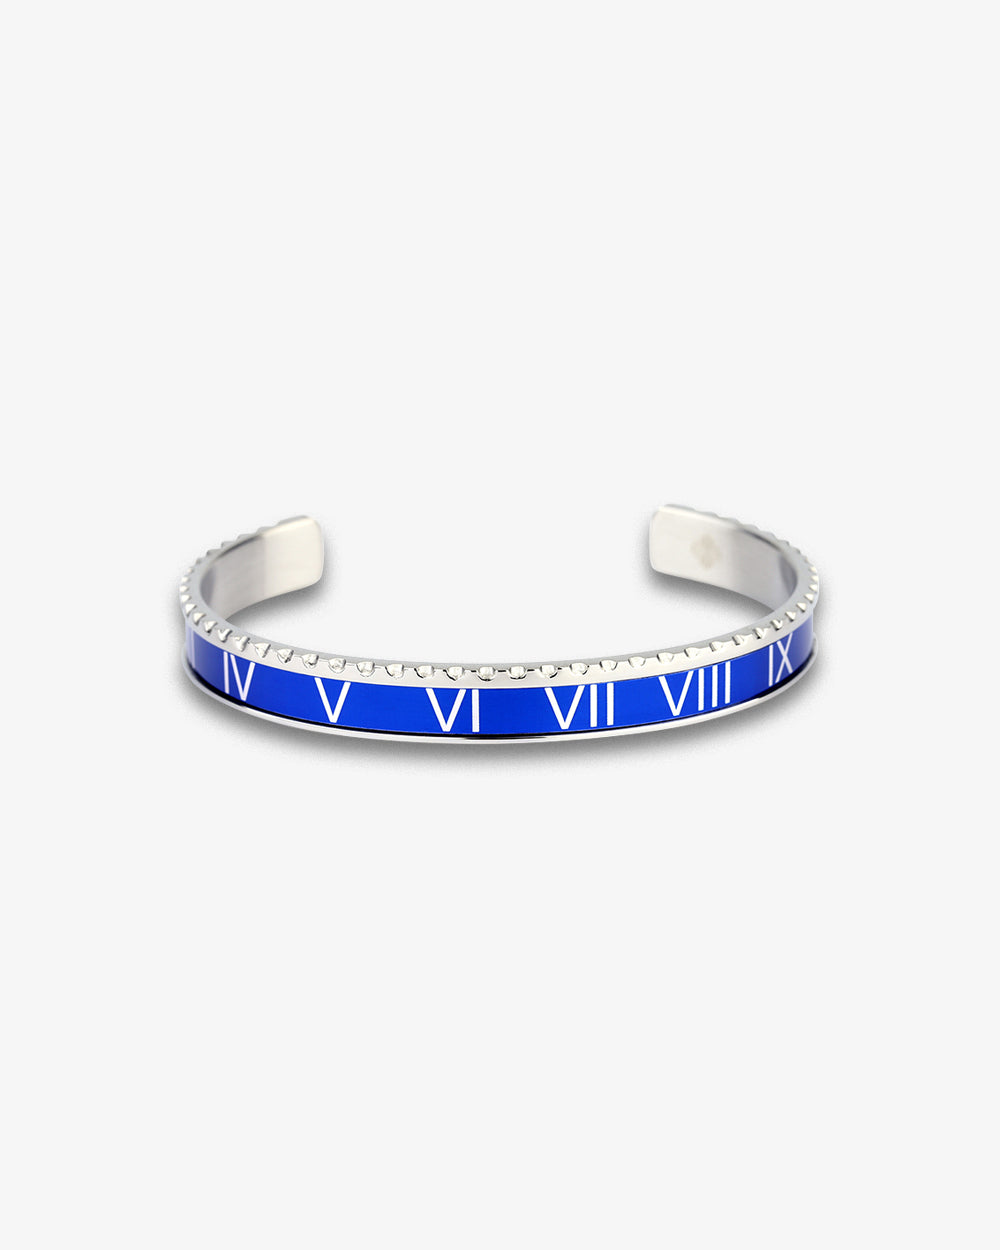 Swiss Concept Classic Roman Numeral Speed Bracelet (Blue & Stainless Steel) - Stainless Steel